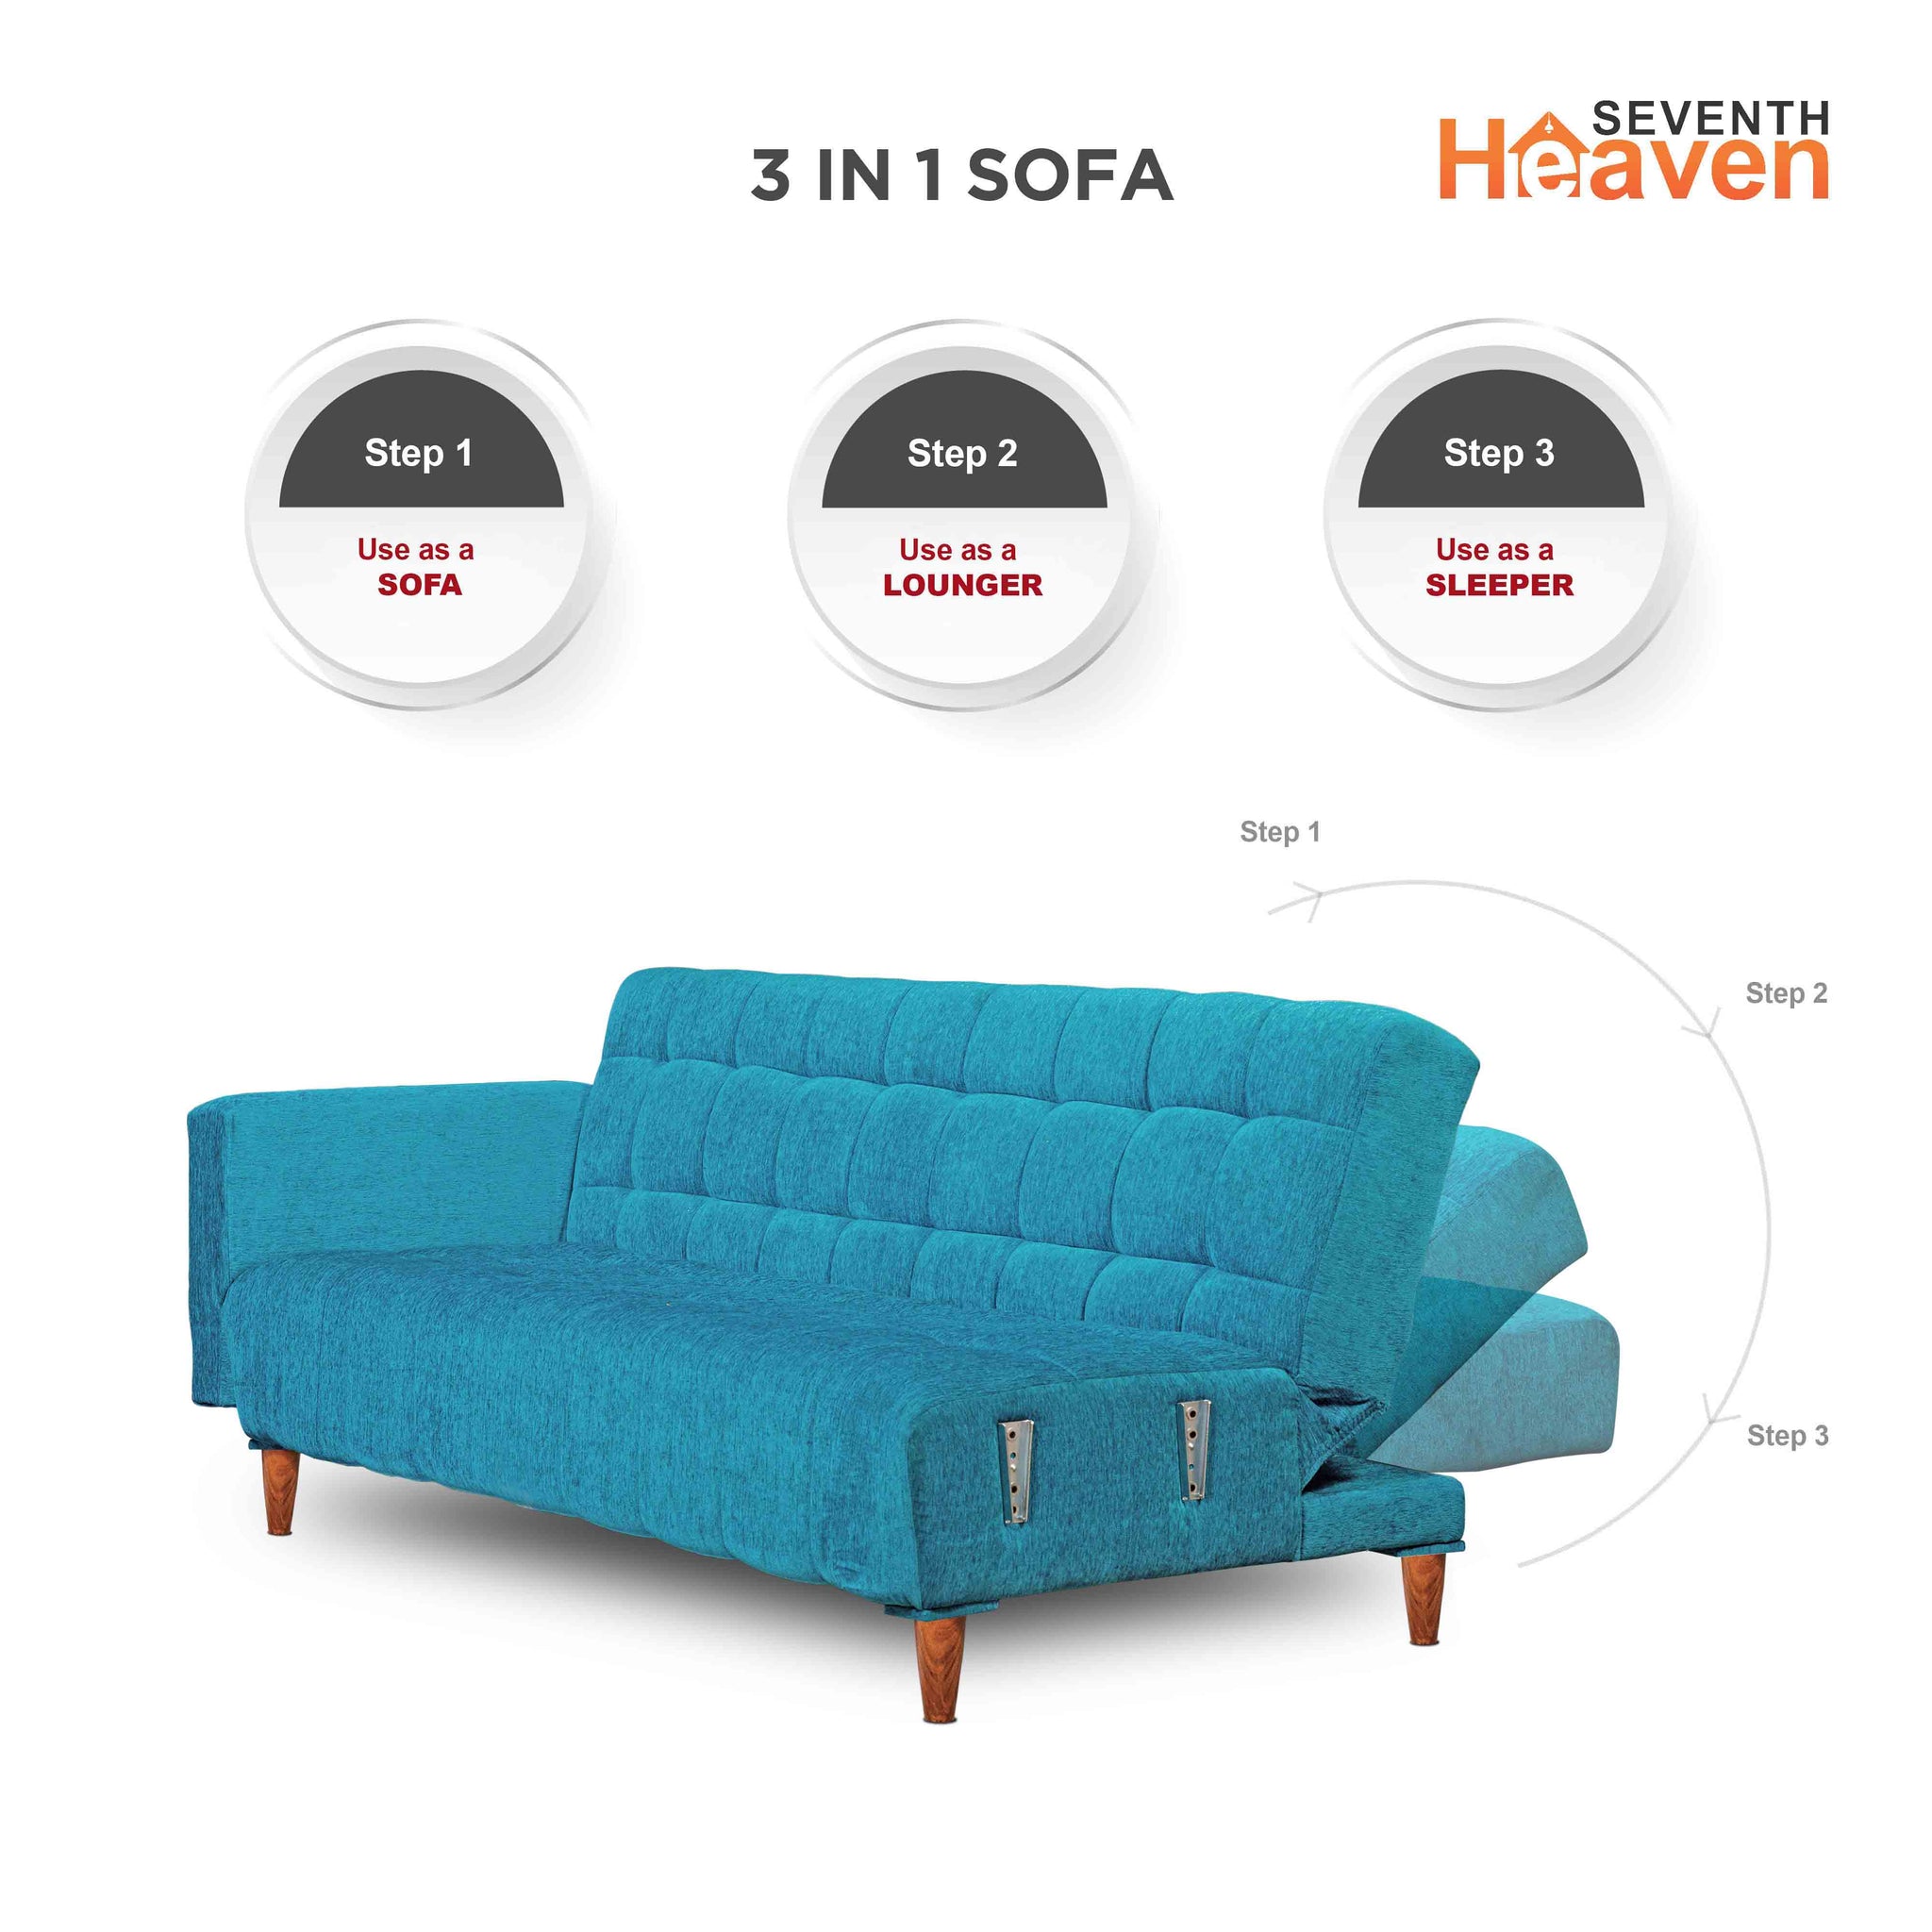 Seventh Heaven Lisbon 4 Seater Wooden Sofa Cum Bed with Armrest. Modern & Elegant Smart Furniture Range for luxurious homes, living rooms and offices. Use as a sofa, lounger or bed with removable armrest. Perfect for guests. Molphino fabric with sheesham polished wooden legs. Sky Blue colour.